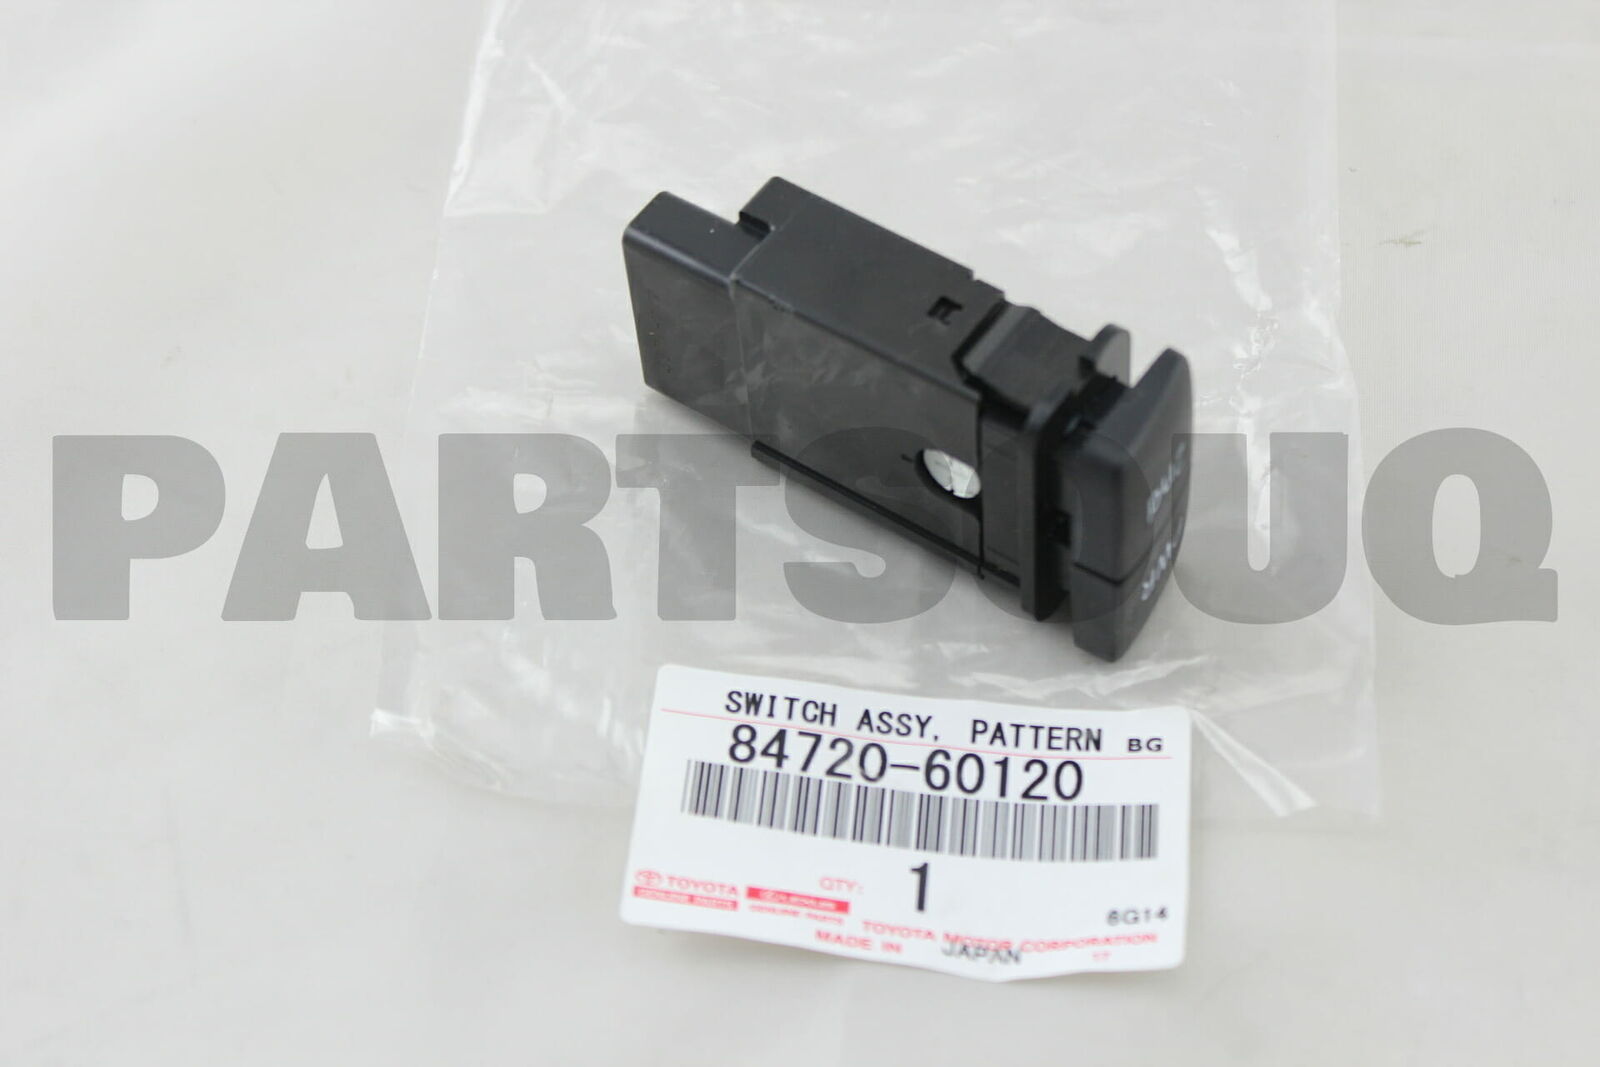 8472060120 Genuine Toyota SWITCH ASSY, PATTERN SELECT 84720-60120